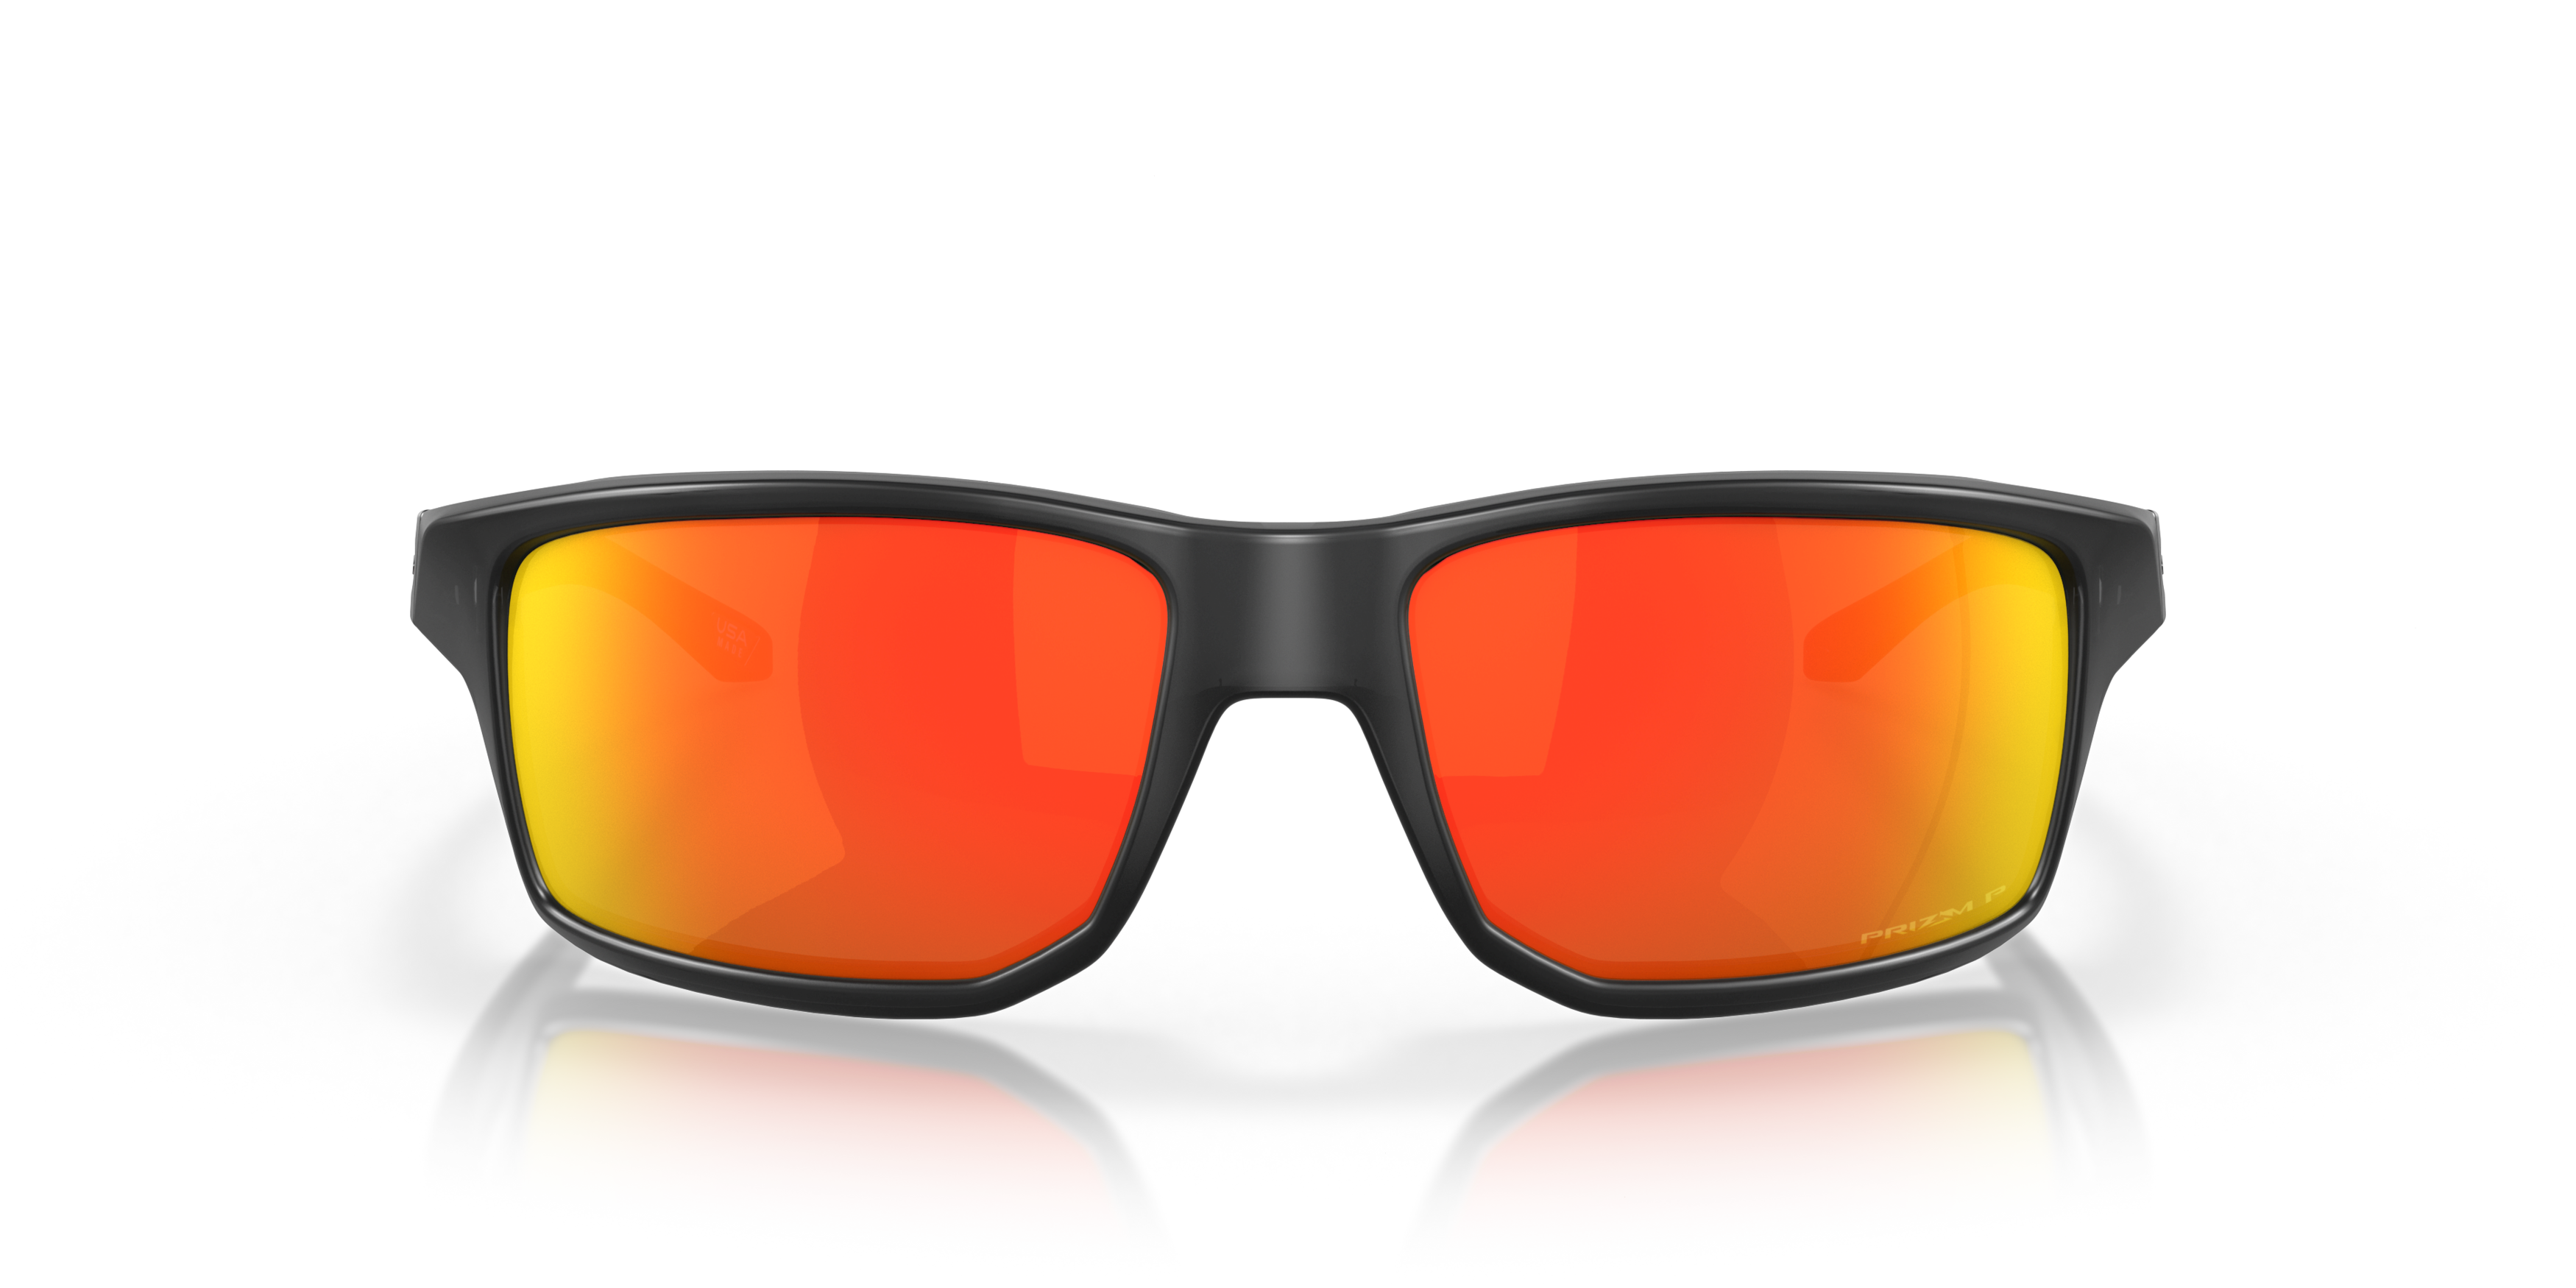 [products.image.front] Oakley OO9449 944905